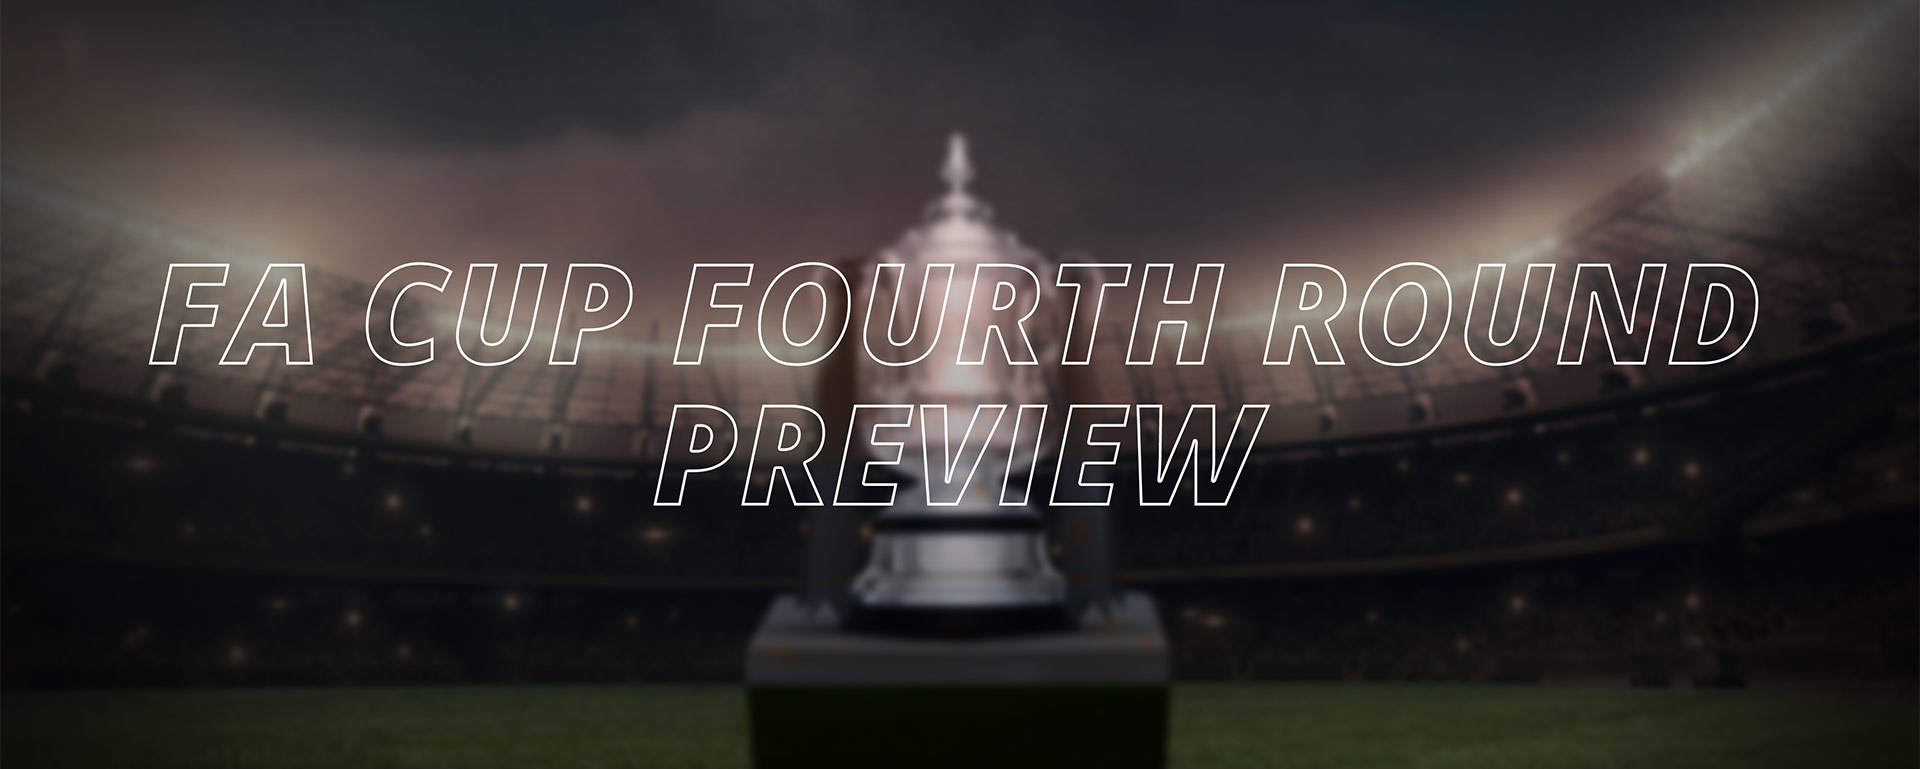 FA CUP – FOURTH ROUND BETTING TIPS